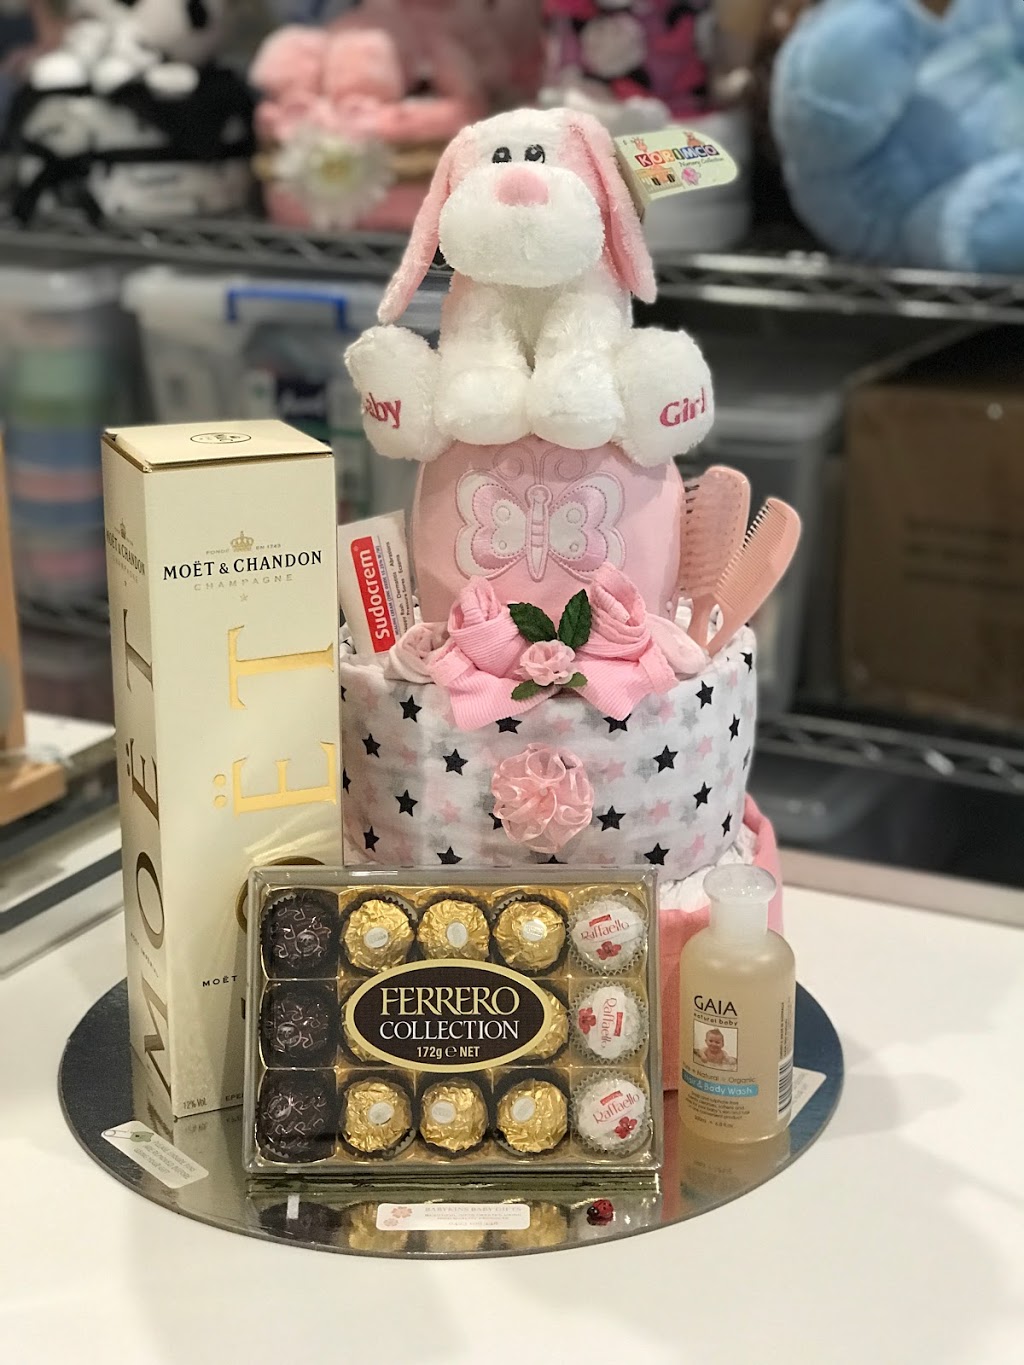 Babykins Baby Gifts - Nappy Cakes and Baby Gifts | clothing store | 3 Amstel Mews, Cranbourne VIC 3977, Australia | 0423109448 OR +61 423 109 448